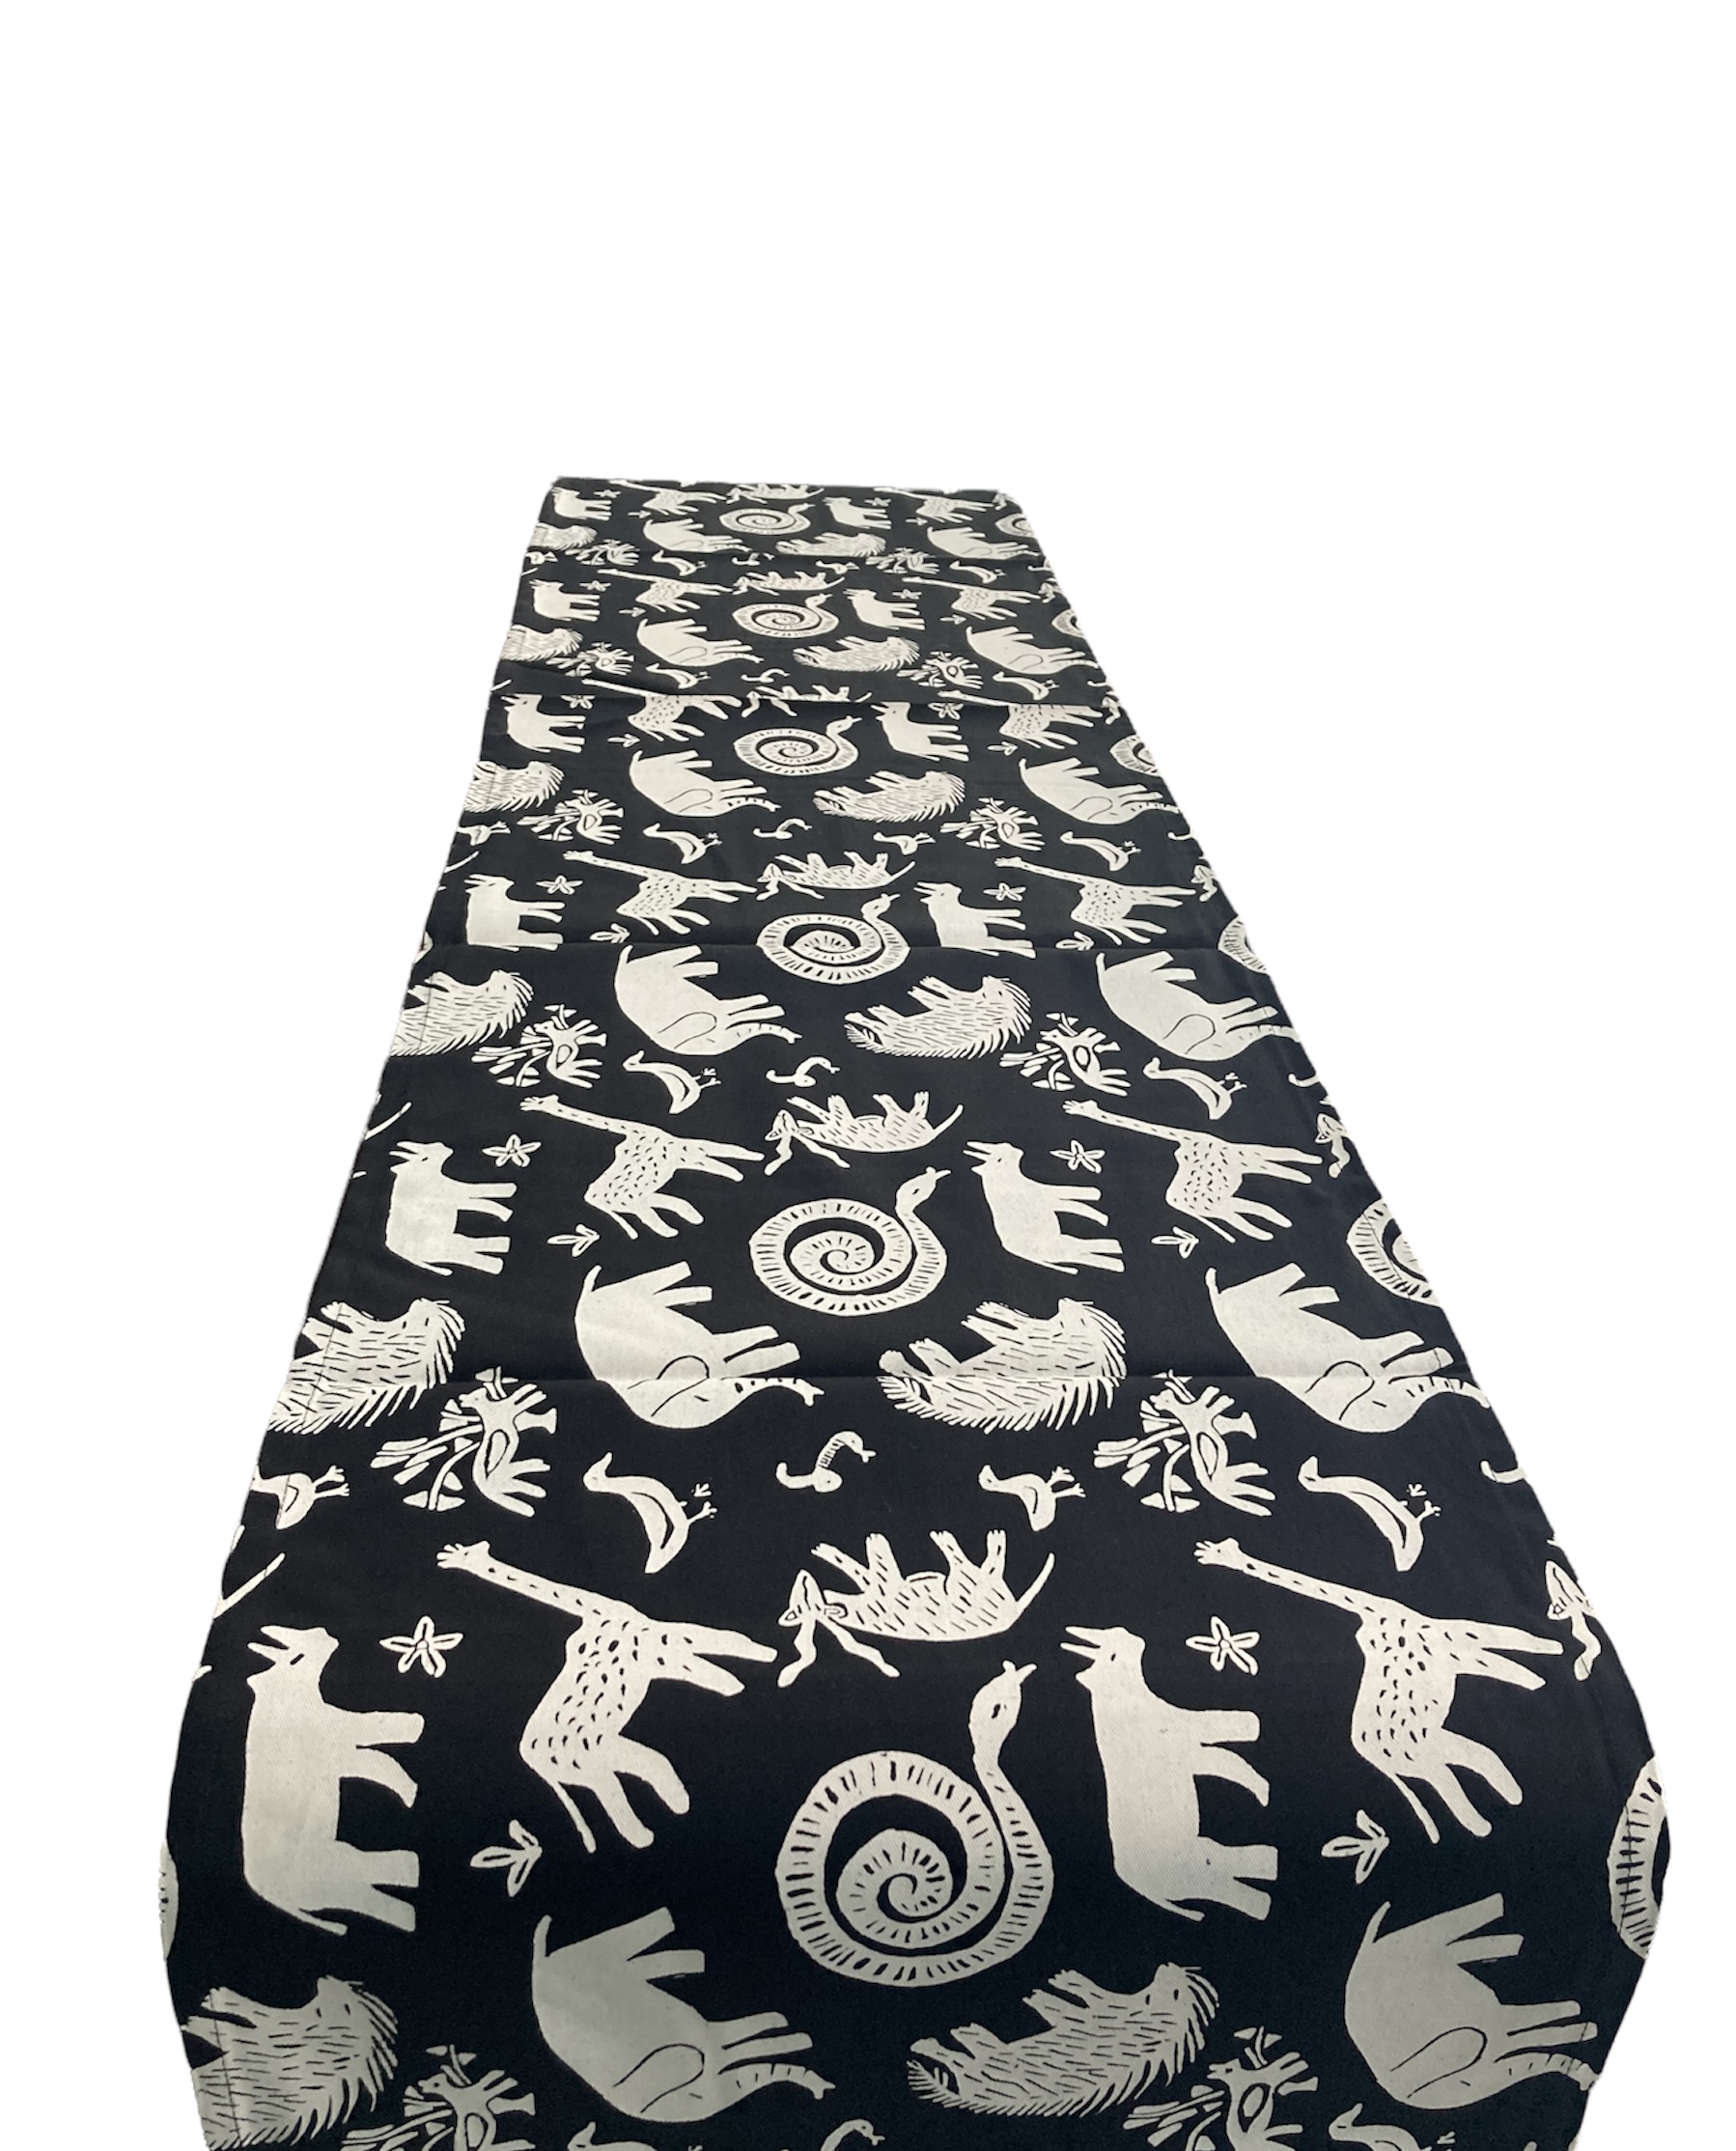 100% cotton Table Runner 96" x 16" from Namibia - Design wb04l